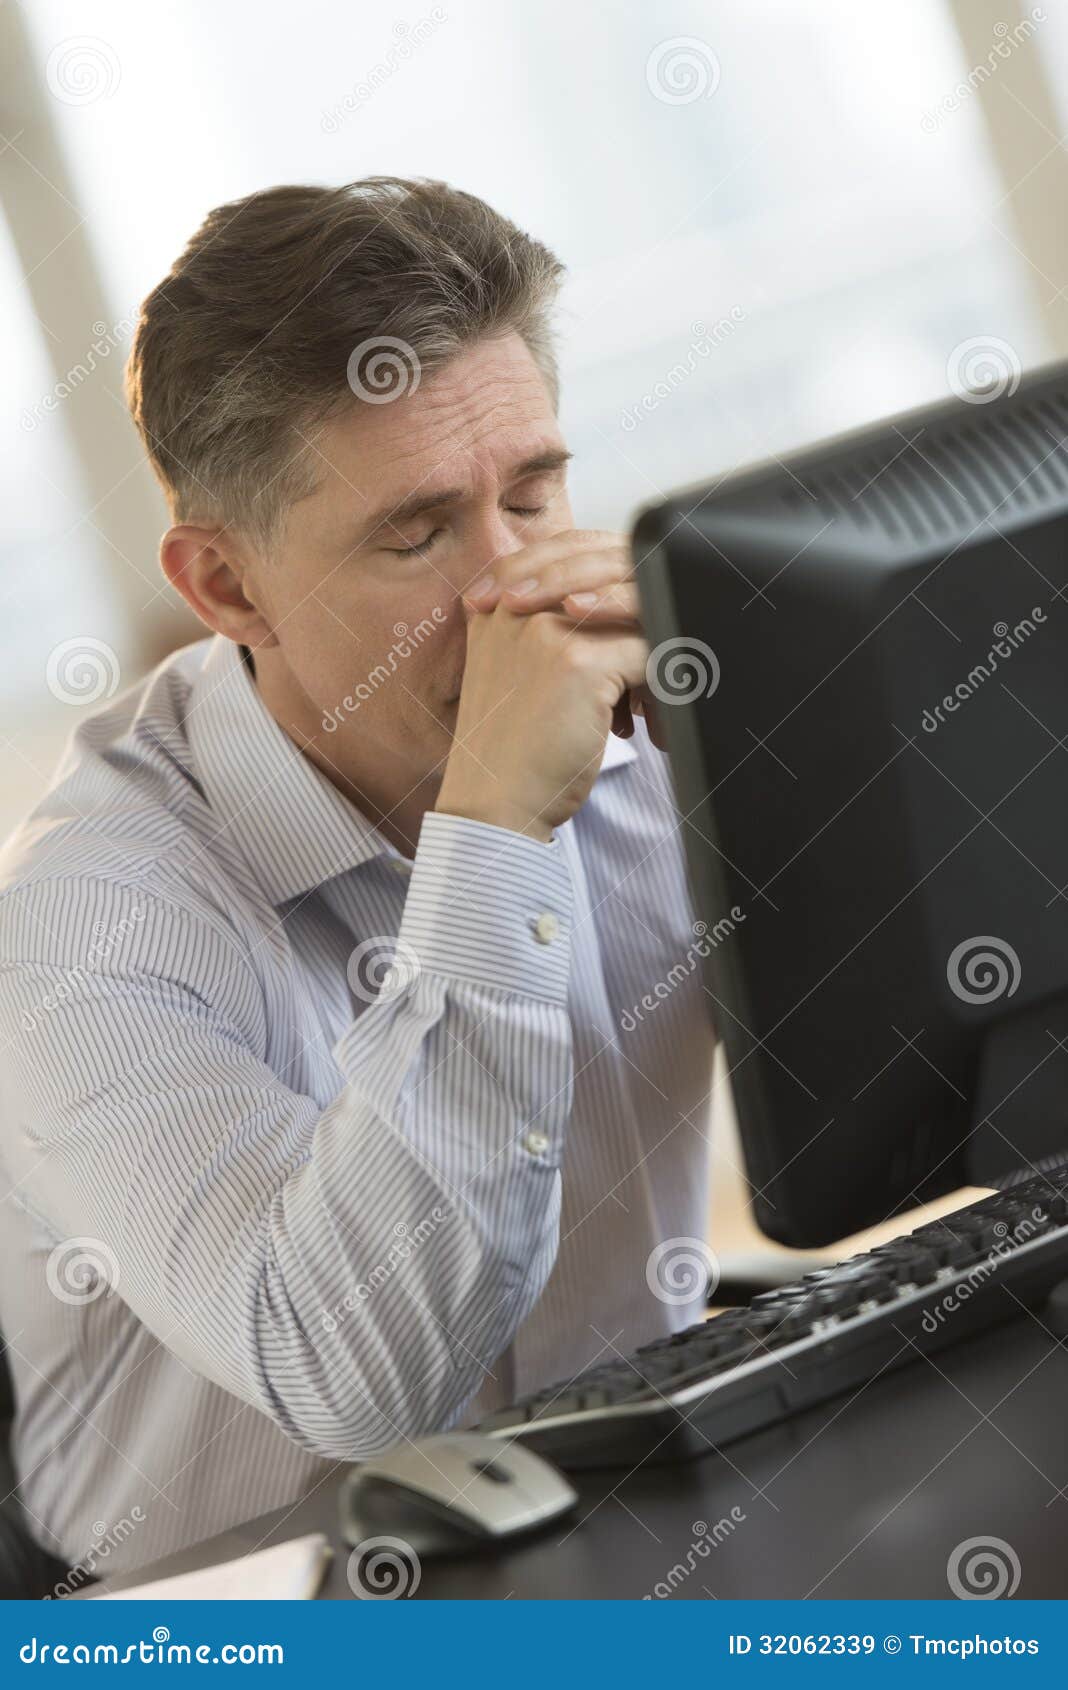 Exhausted Businessman Leaning On Computer Desk Stock Image Image